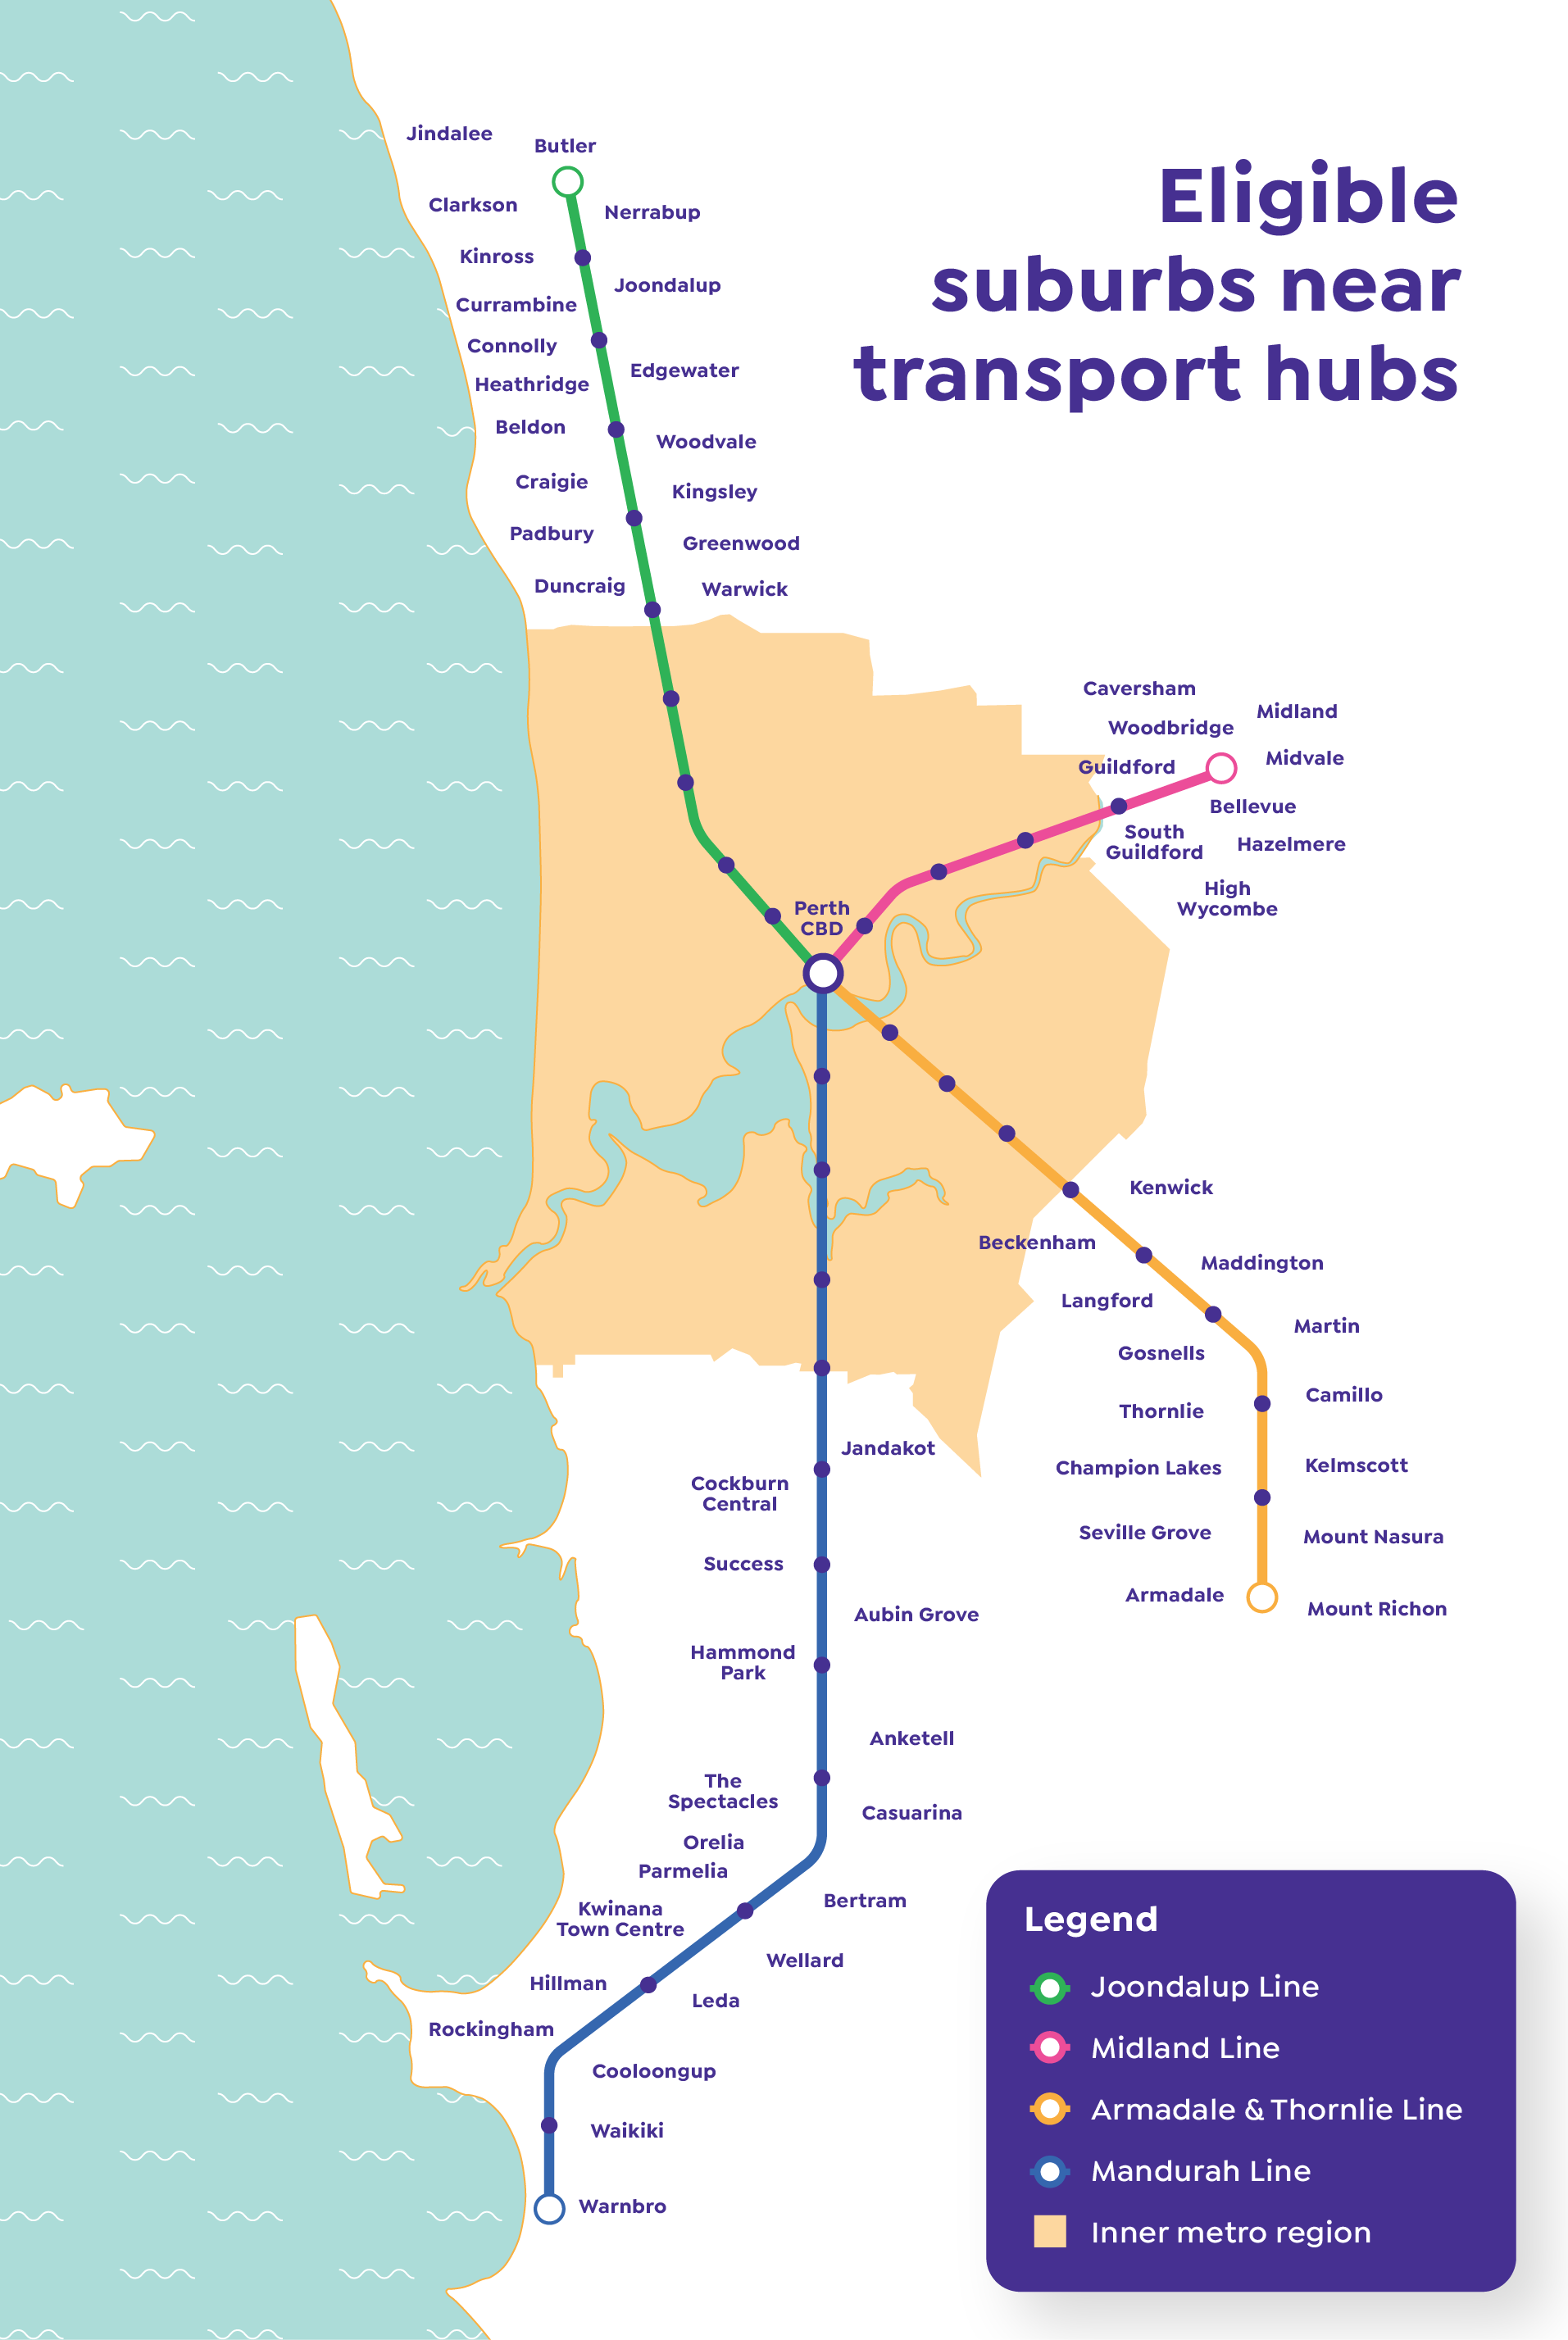 Map of Perth with rail transport lines